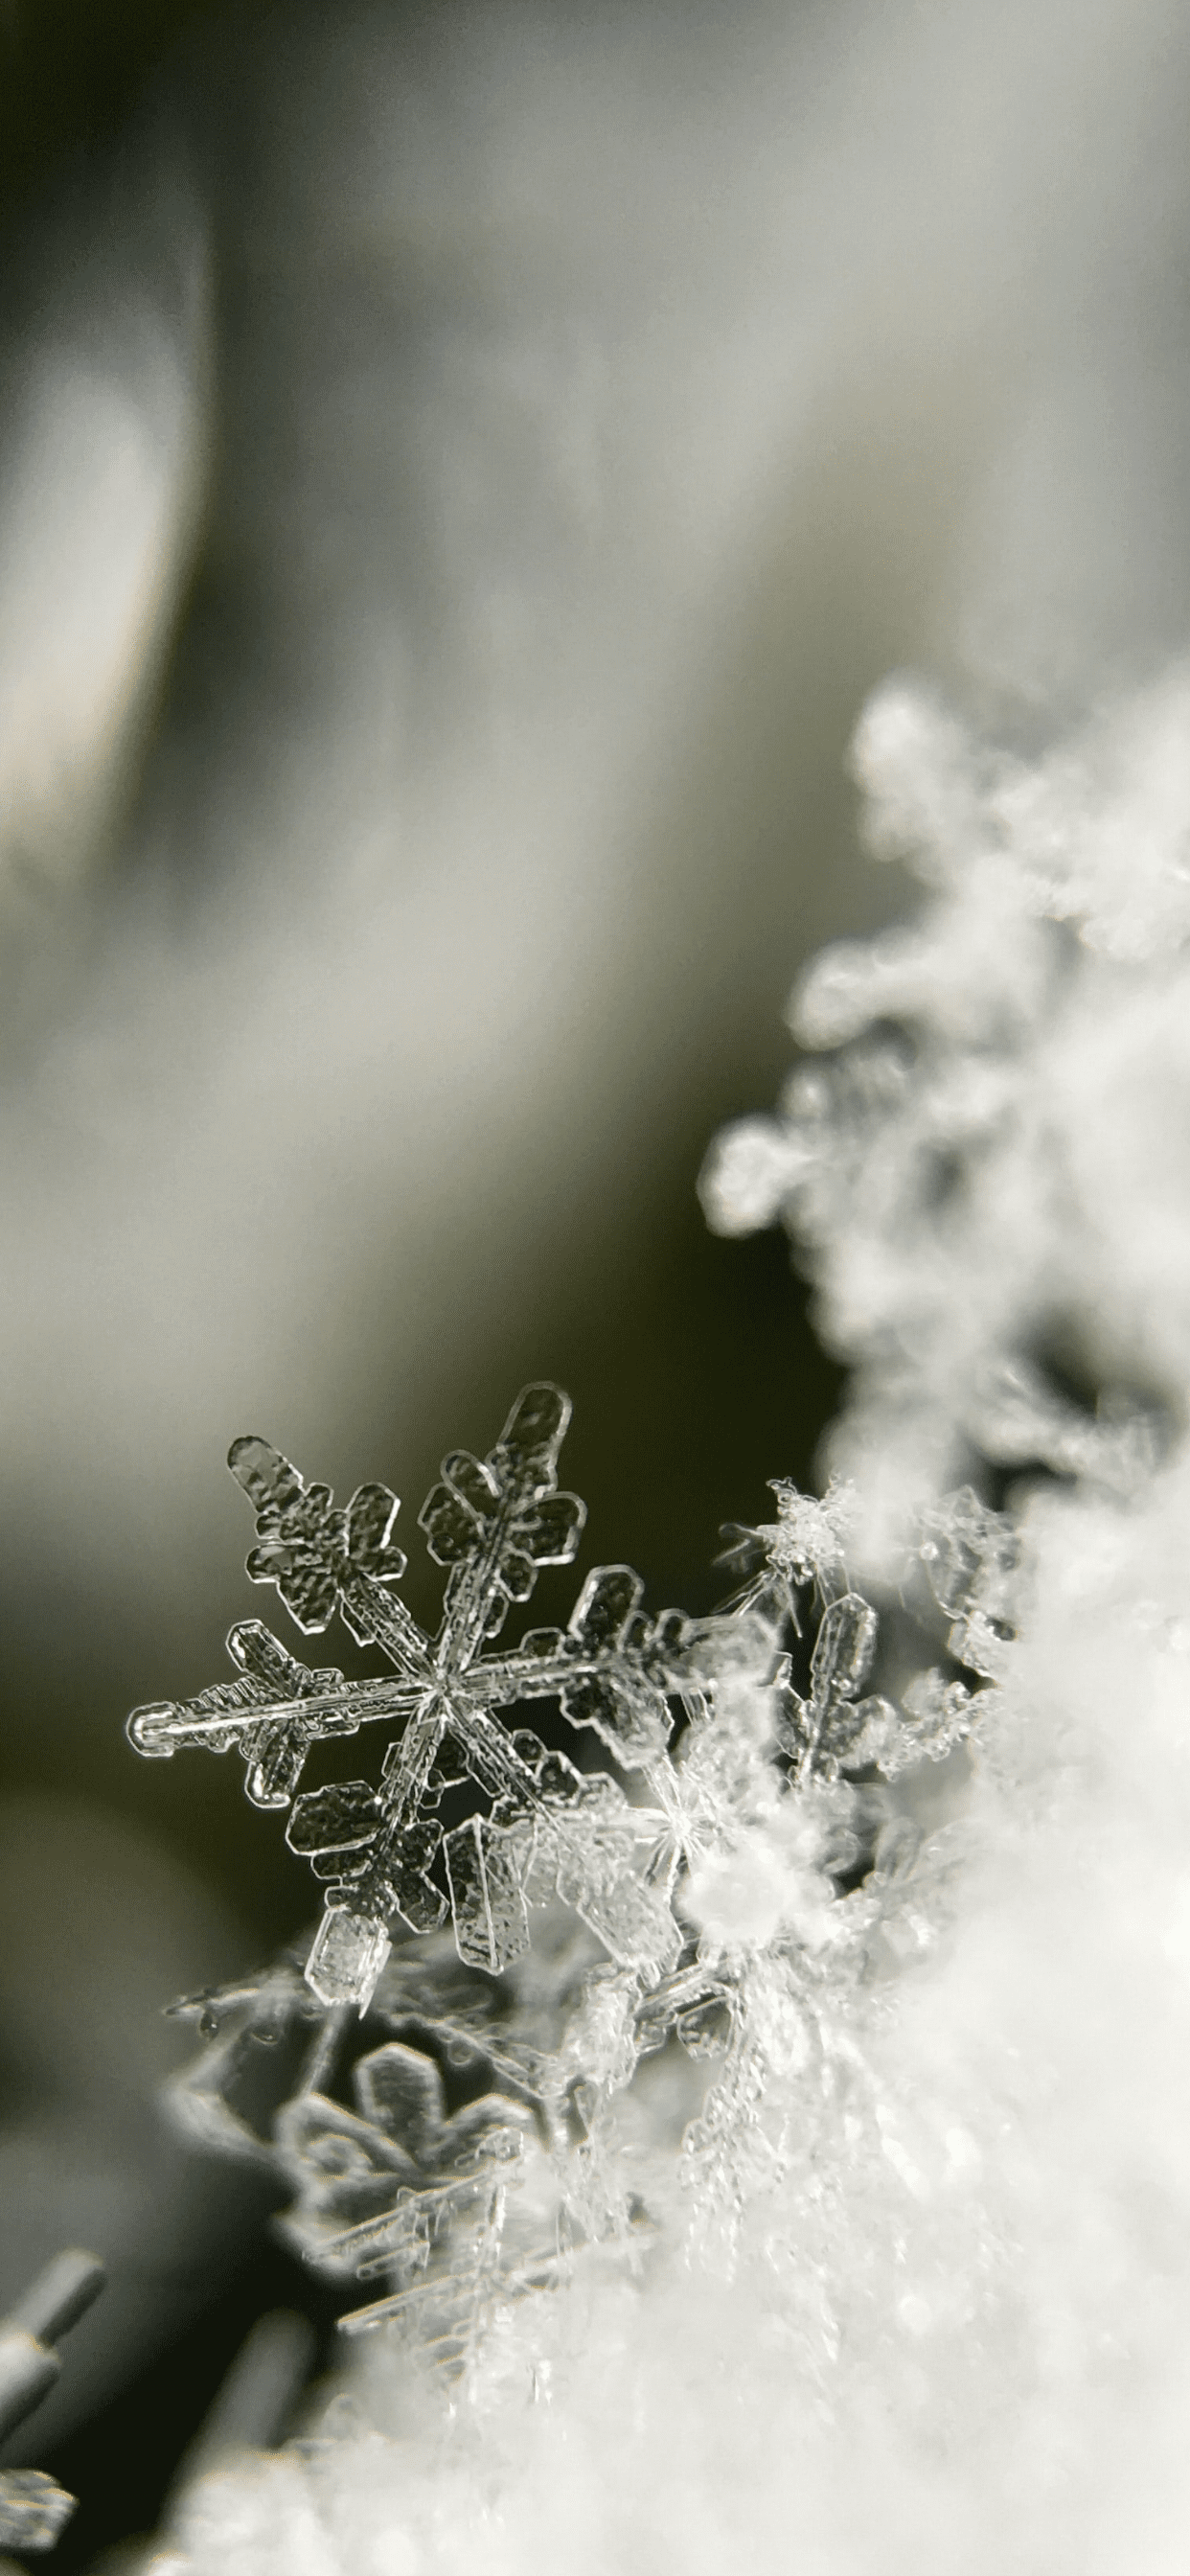 Snowflakes Wallpaper for iPhone Pro Max, X, 6